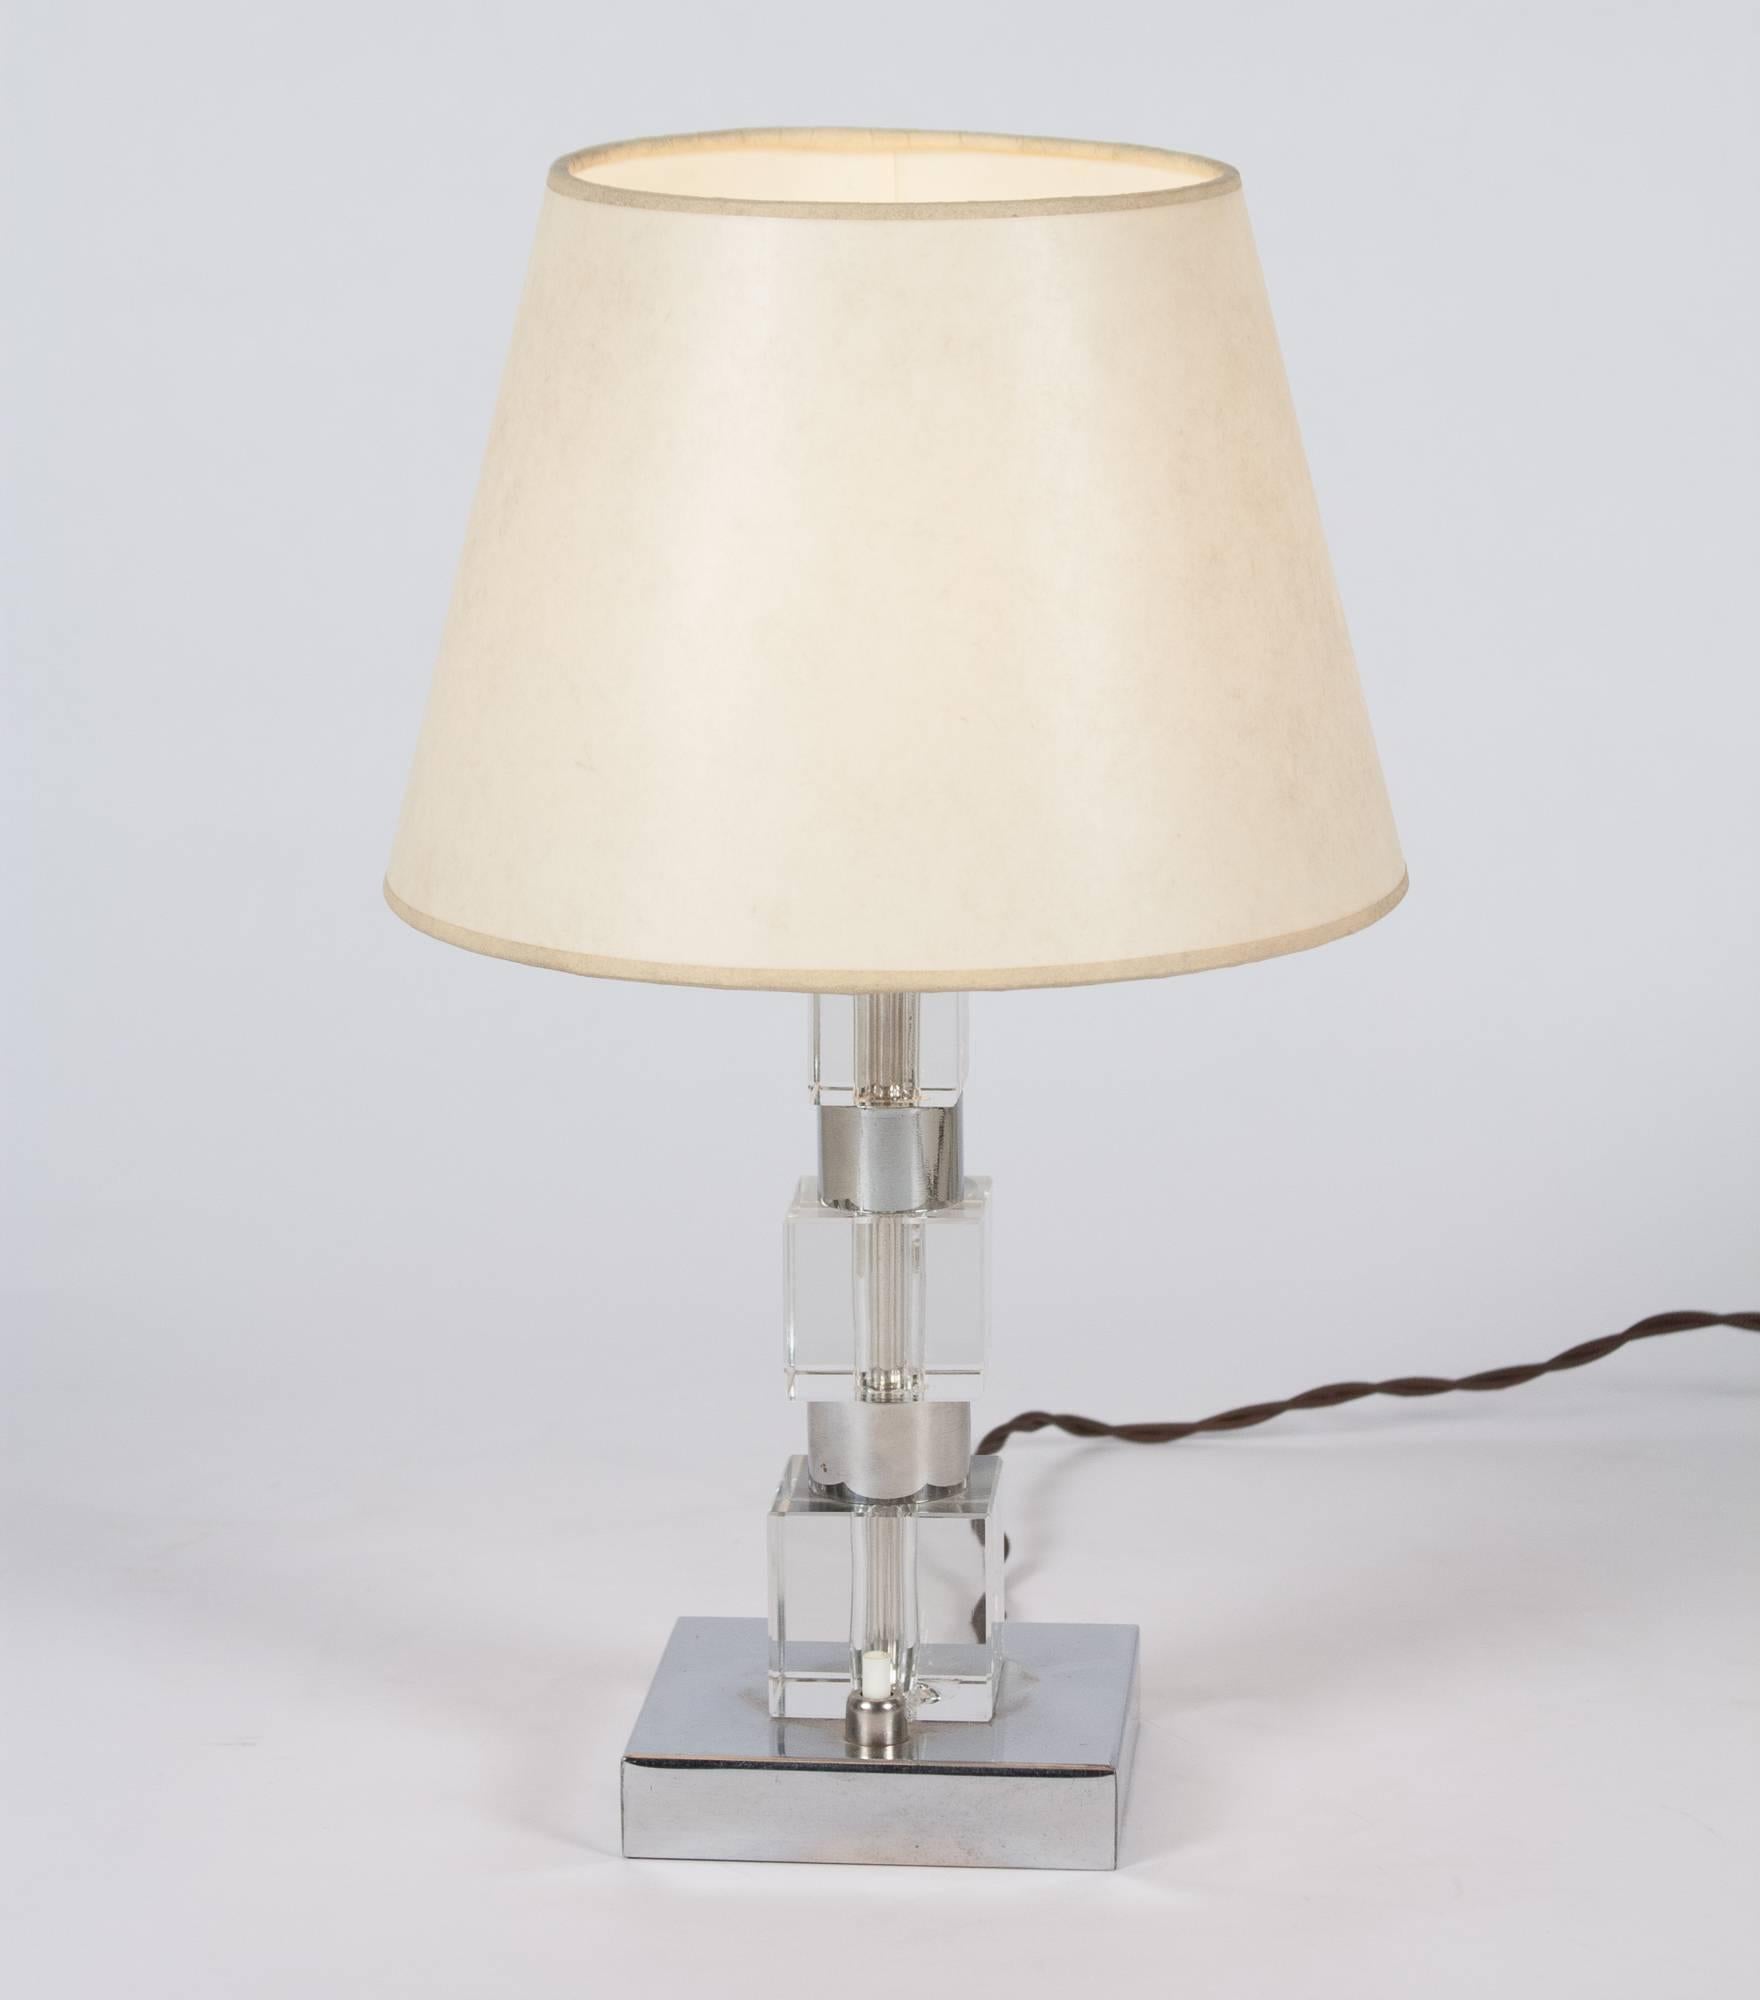 Chrome and Glass Desk Lamp, French, 1930s For Sale 1